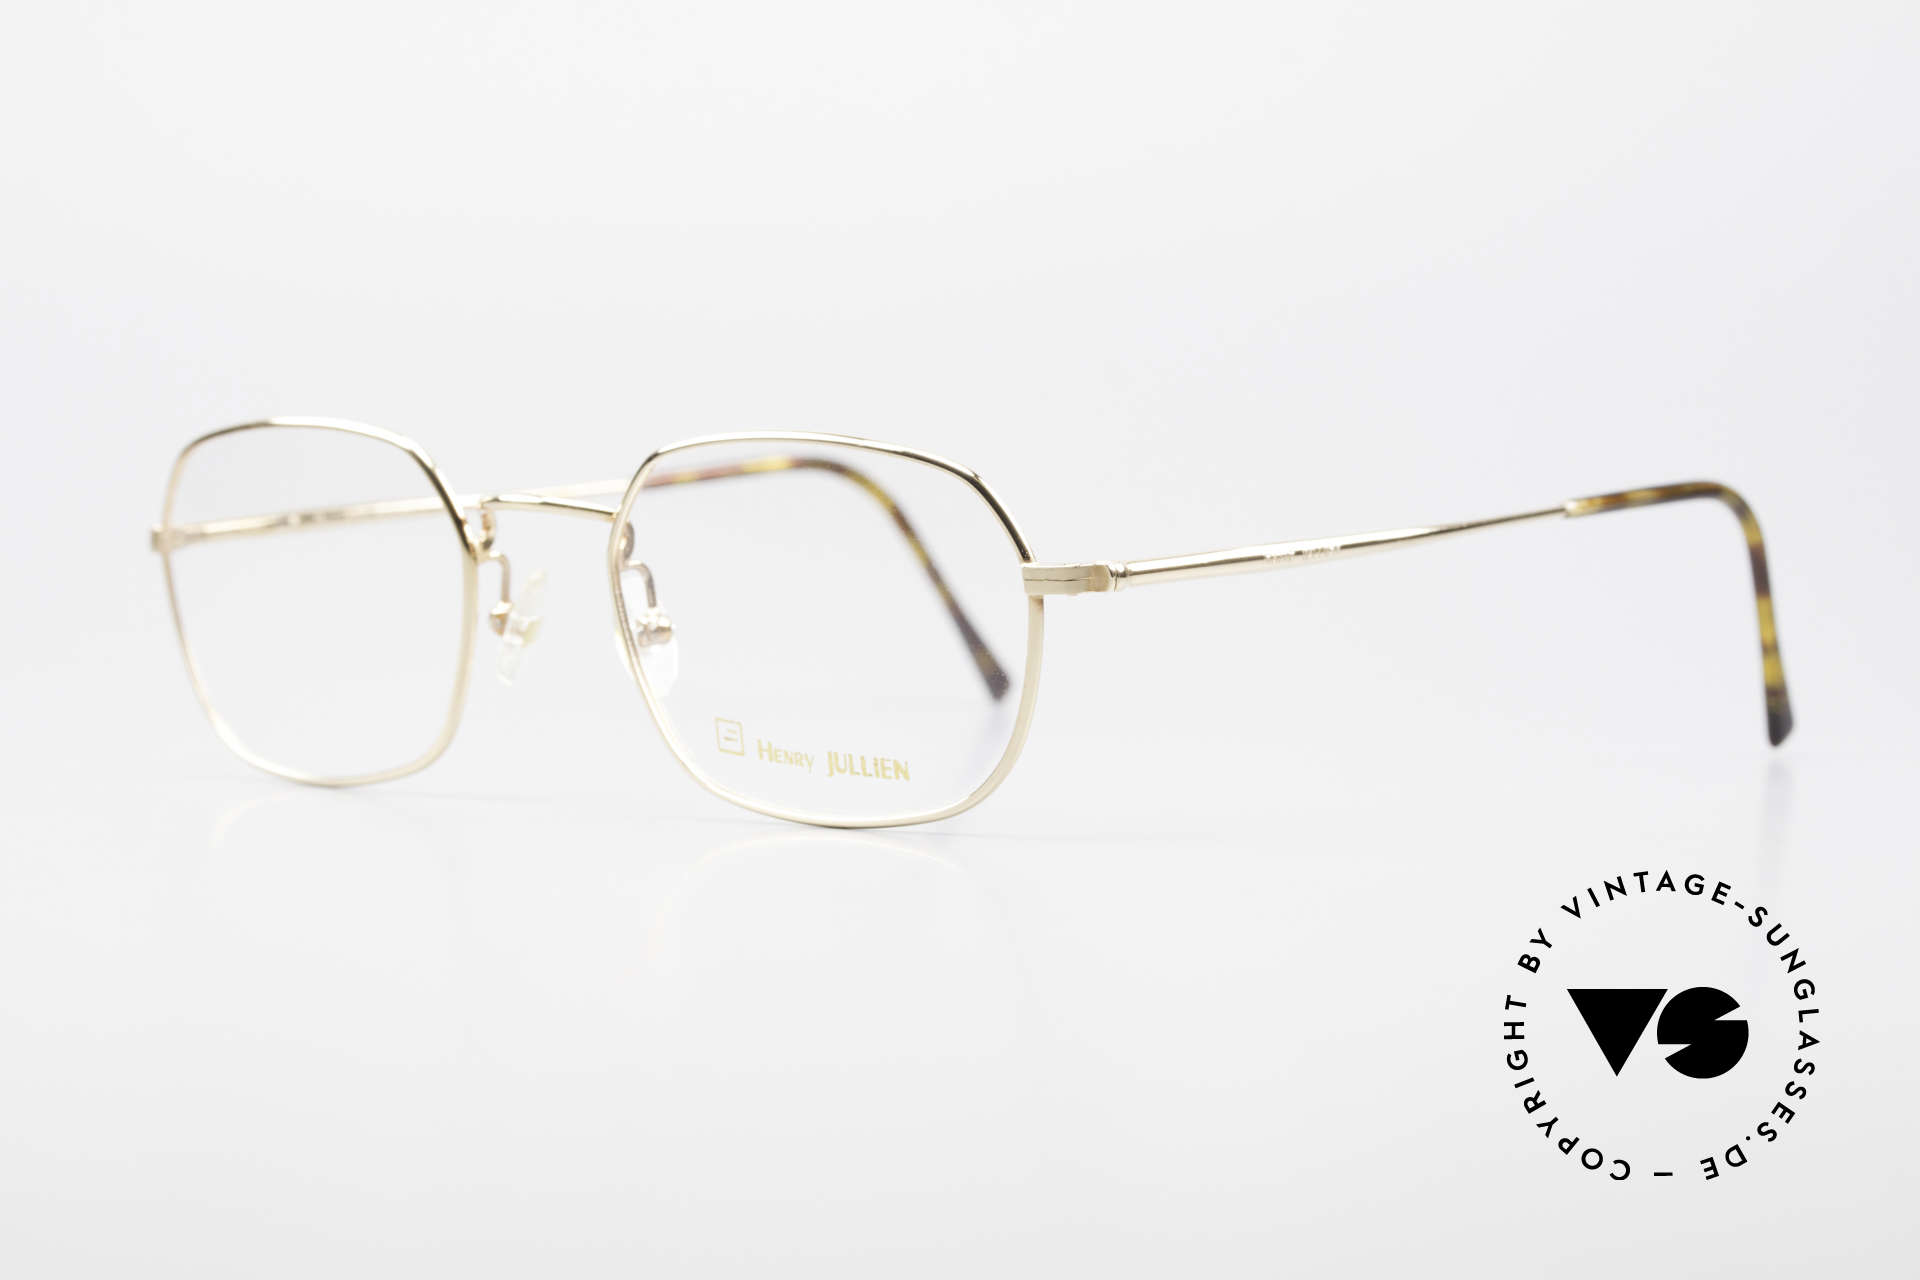 Henry Jullien Reale 05 Gold Plated Vintage Frame, classic full rimmed frame with flexible spring hinges, Made for Men and Women